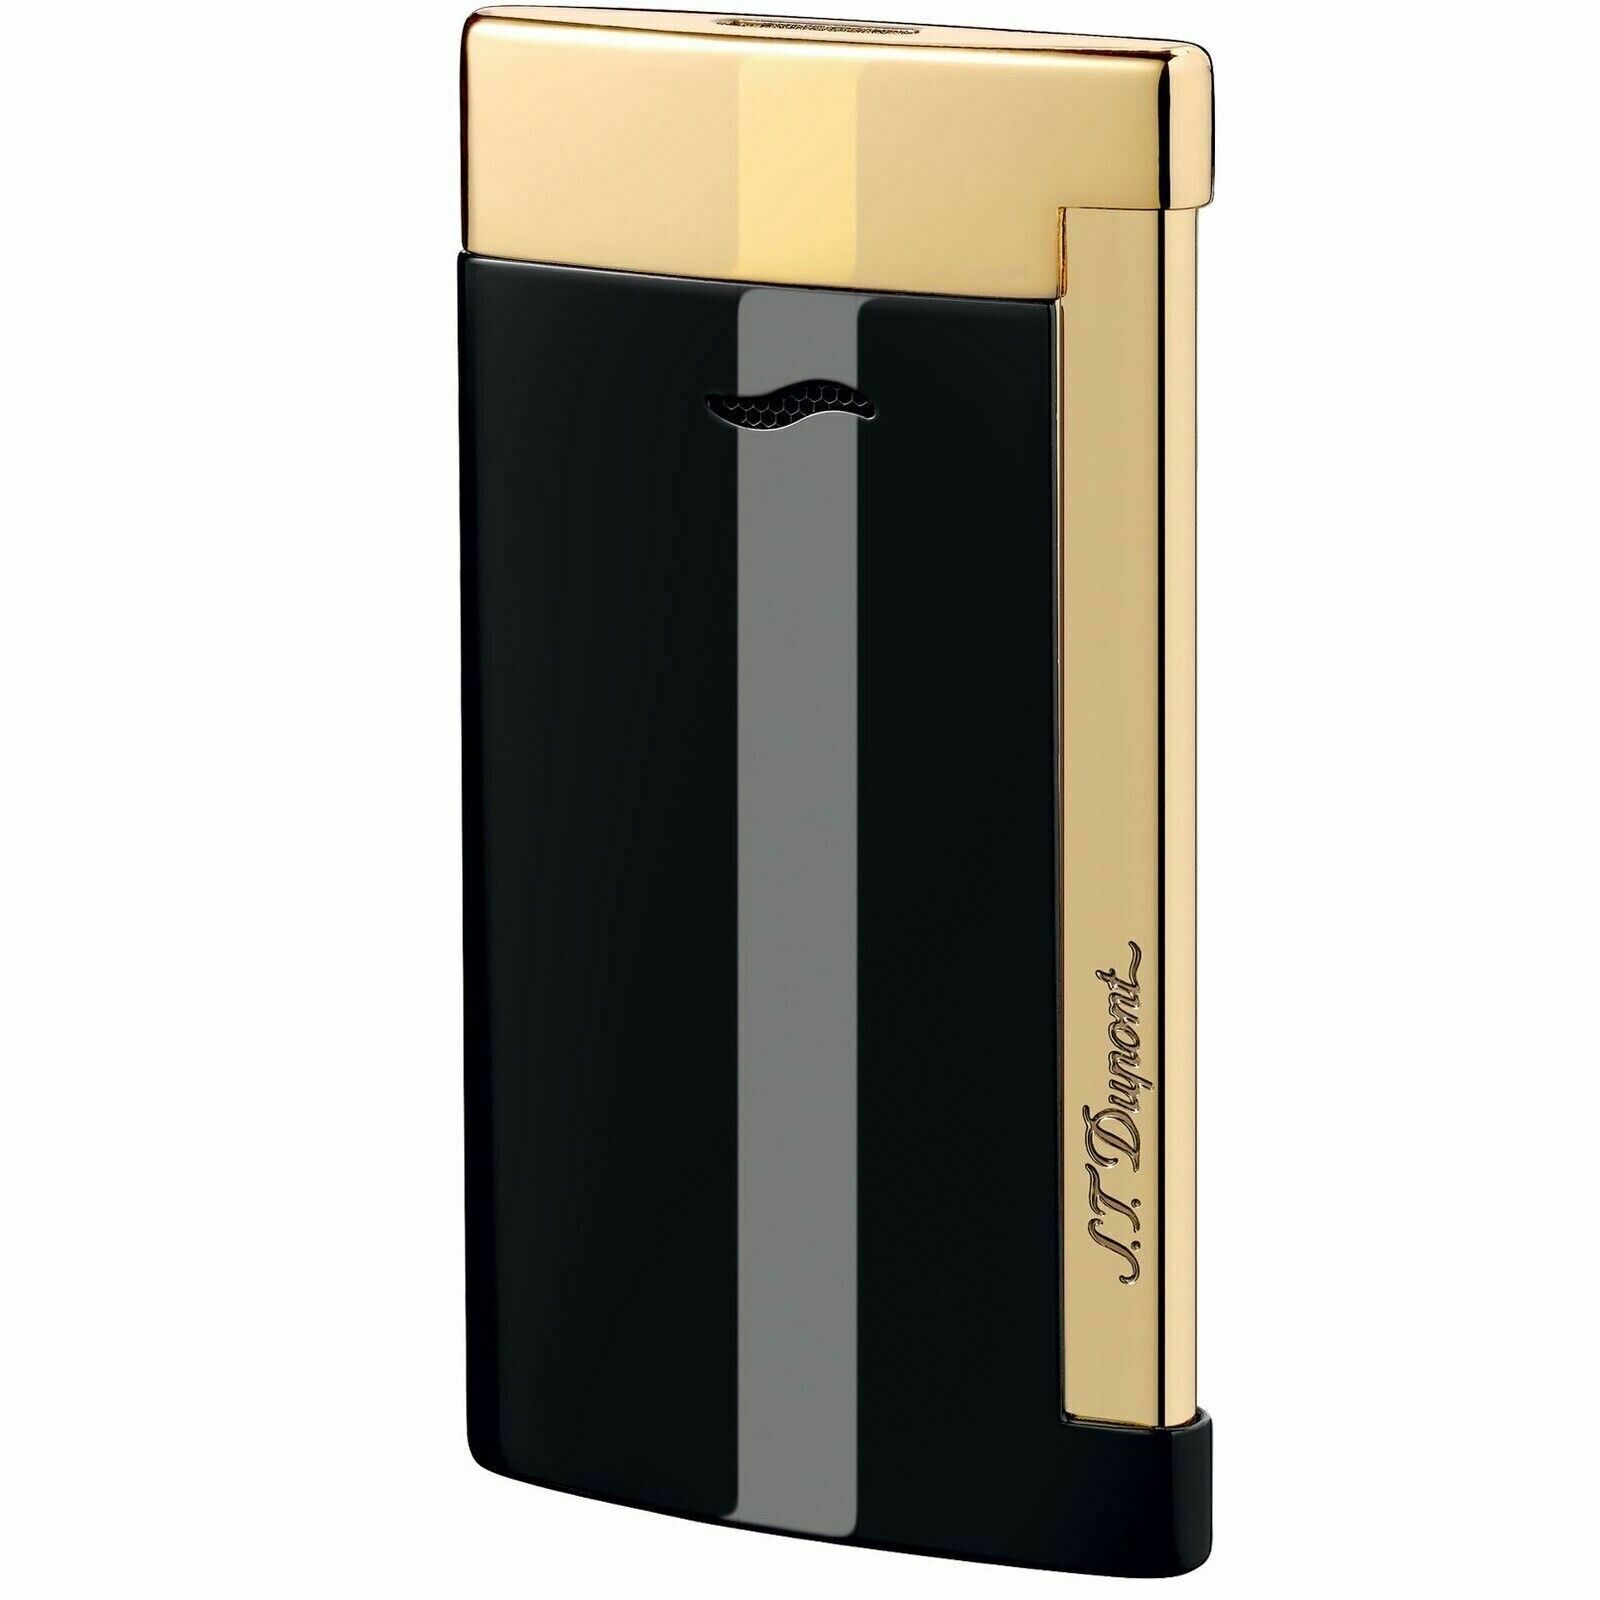 S.T. Dupont Slim 7 Lighter, Black With Gold Accents, 27708 (027708), New In Box